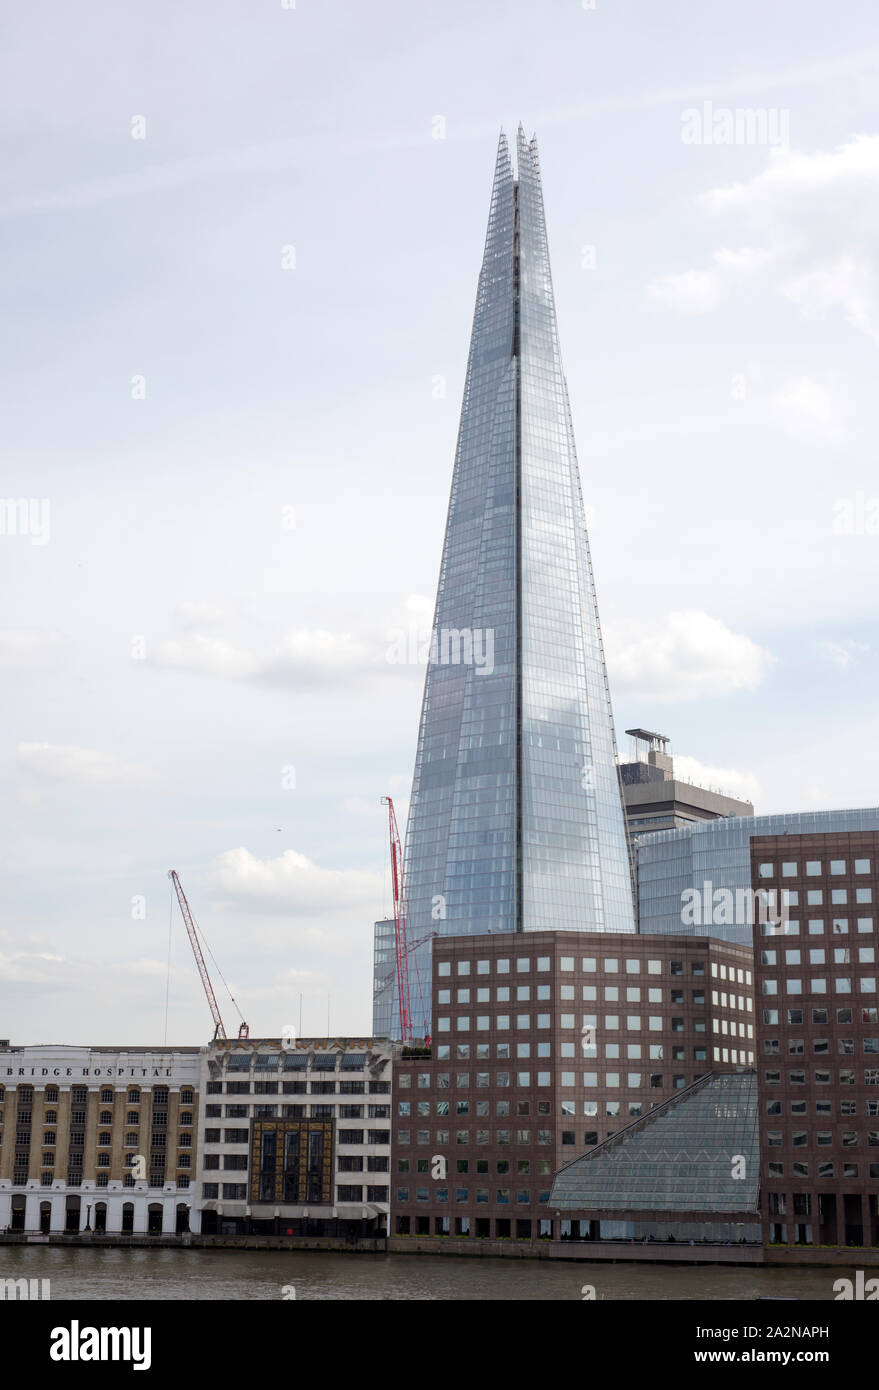 shard skyscraper looming over the river thames in london Stock Photo